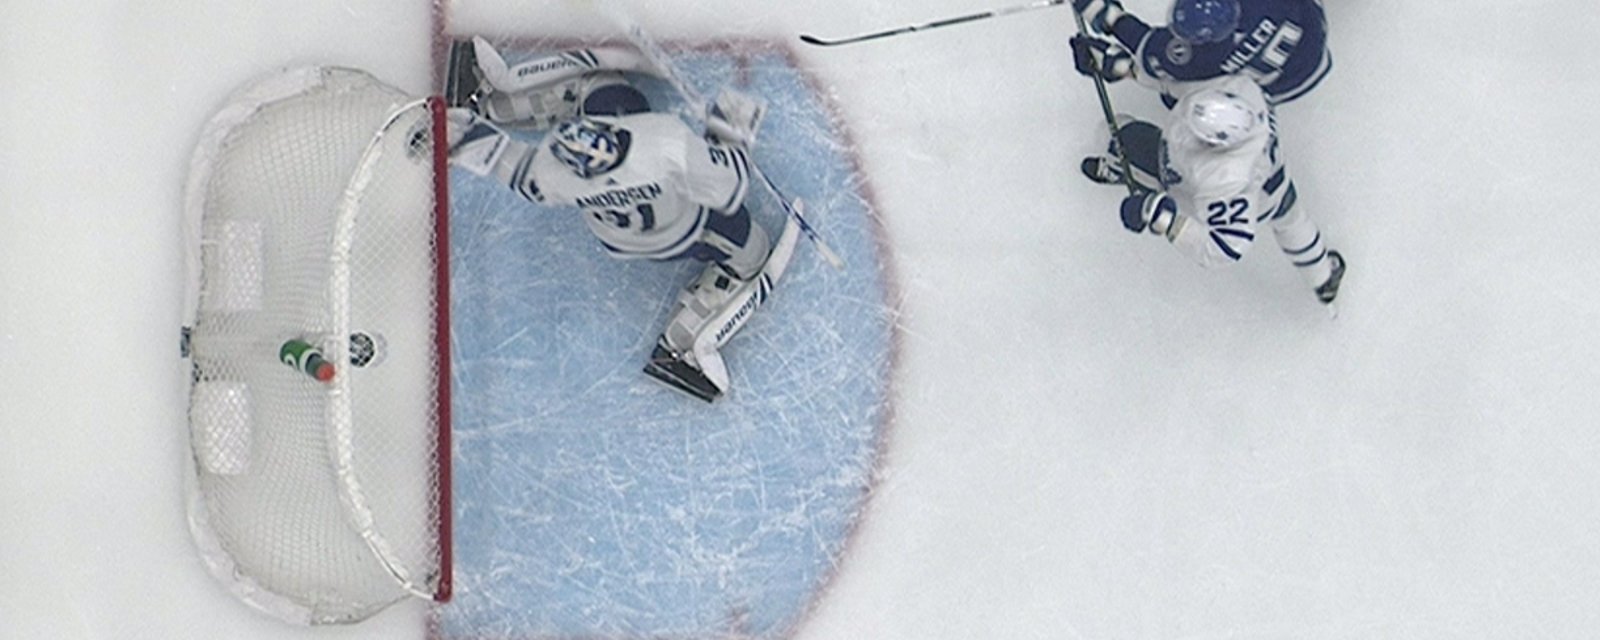 Must See: Andersen ROBS Kucherov… but his glove is over the line!